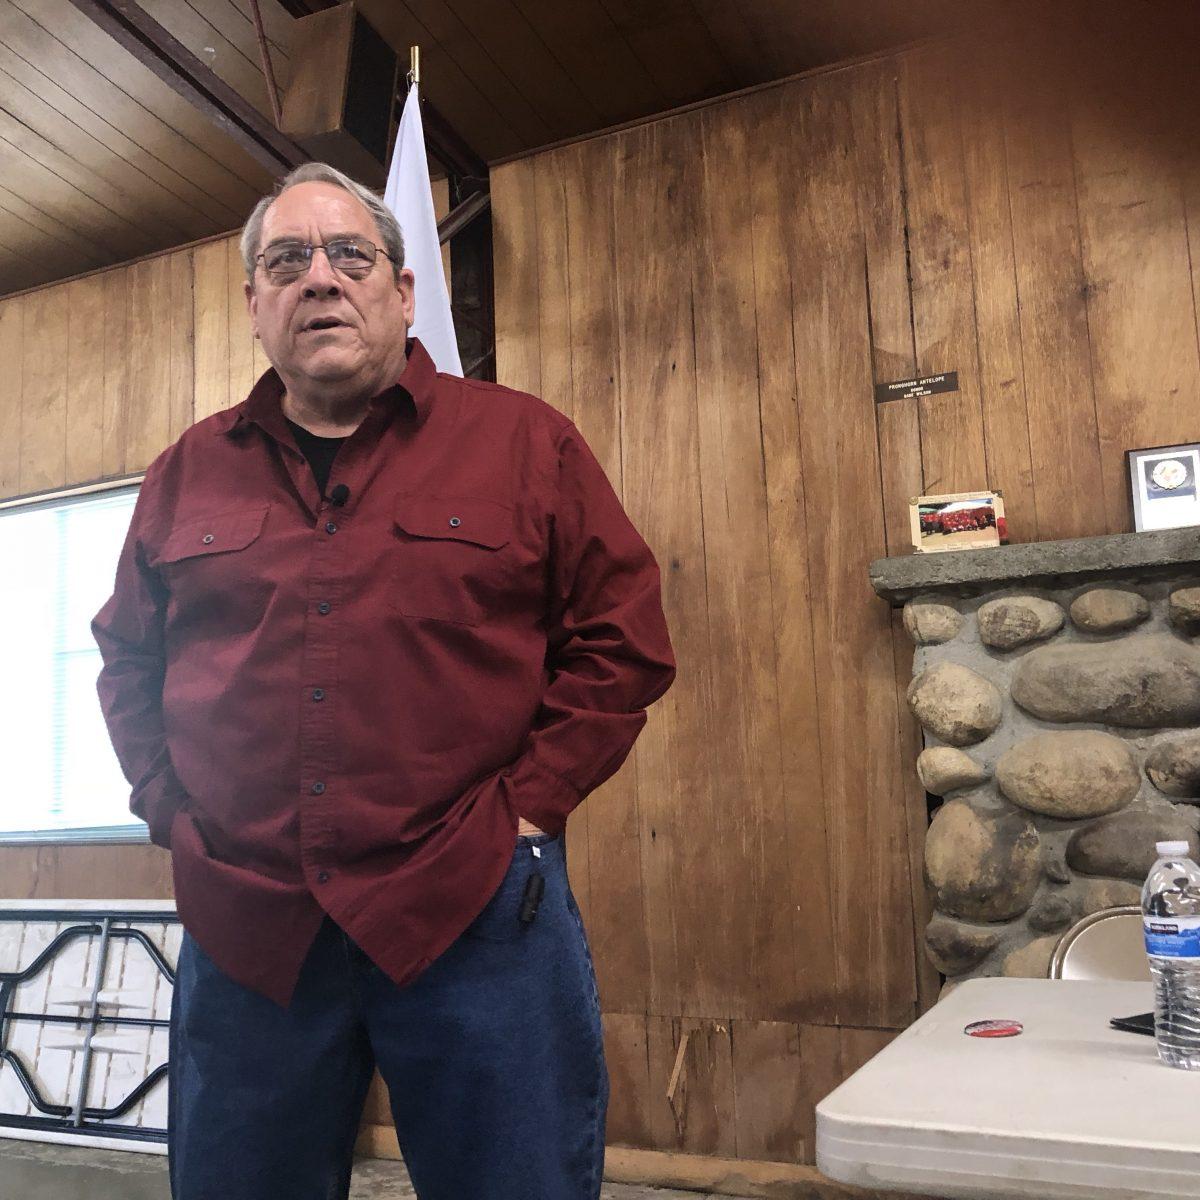 Paul Preston, founder of the New California movement, spoke to the Mariposa County New California Town Hall meeting in Mariposa County, California on Sept. 27. (Nathan Su/The Epoch Times).